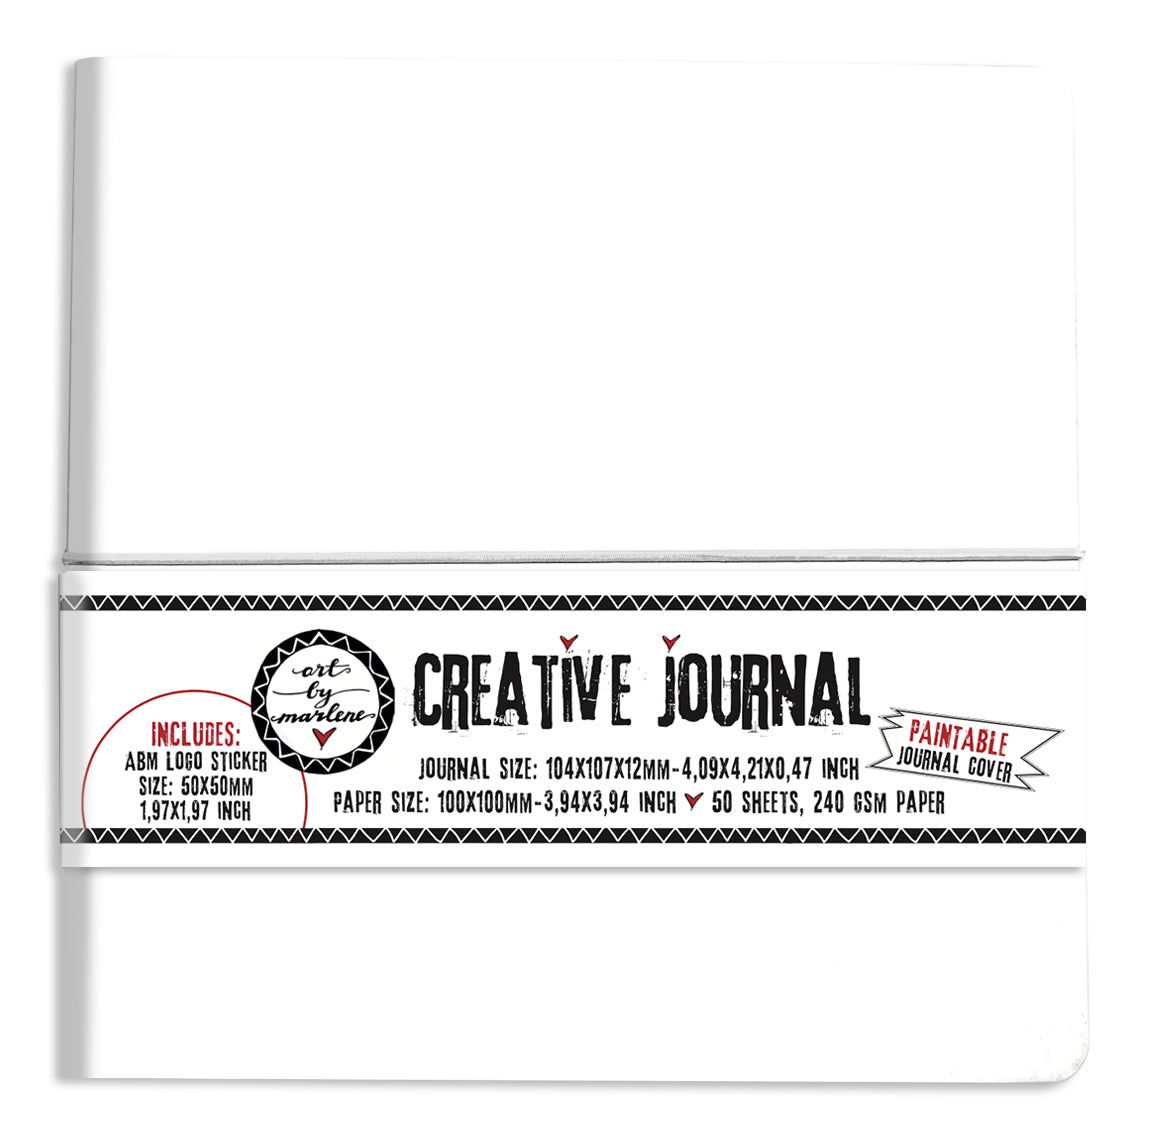 ABM Creative Journal All White, With Separate Sticker Paintable Journal cover 1 PC